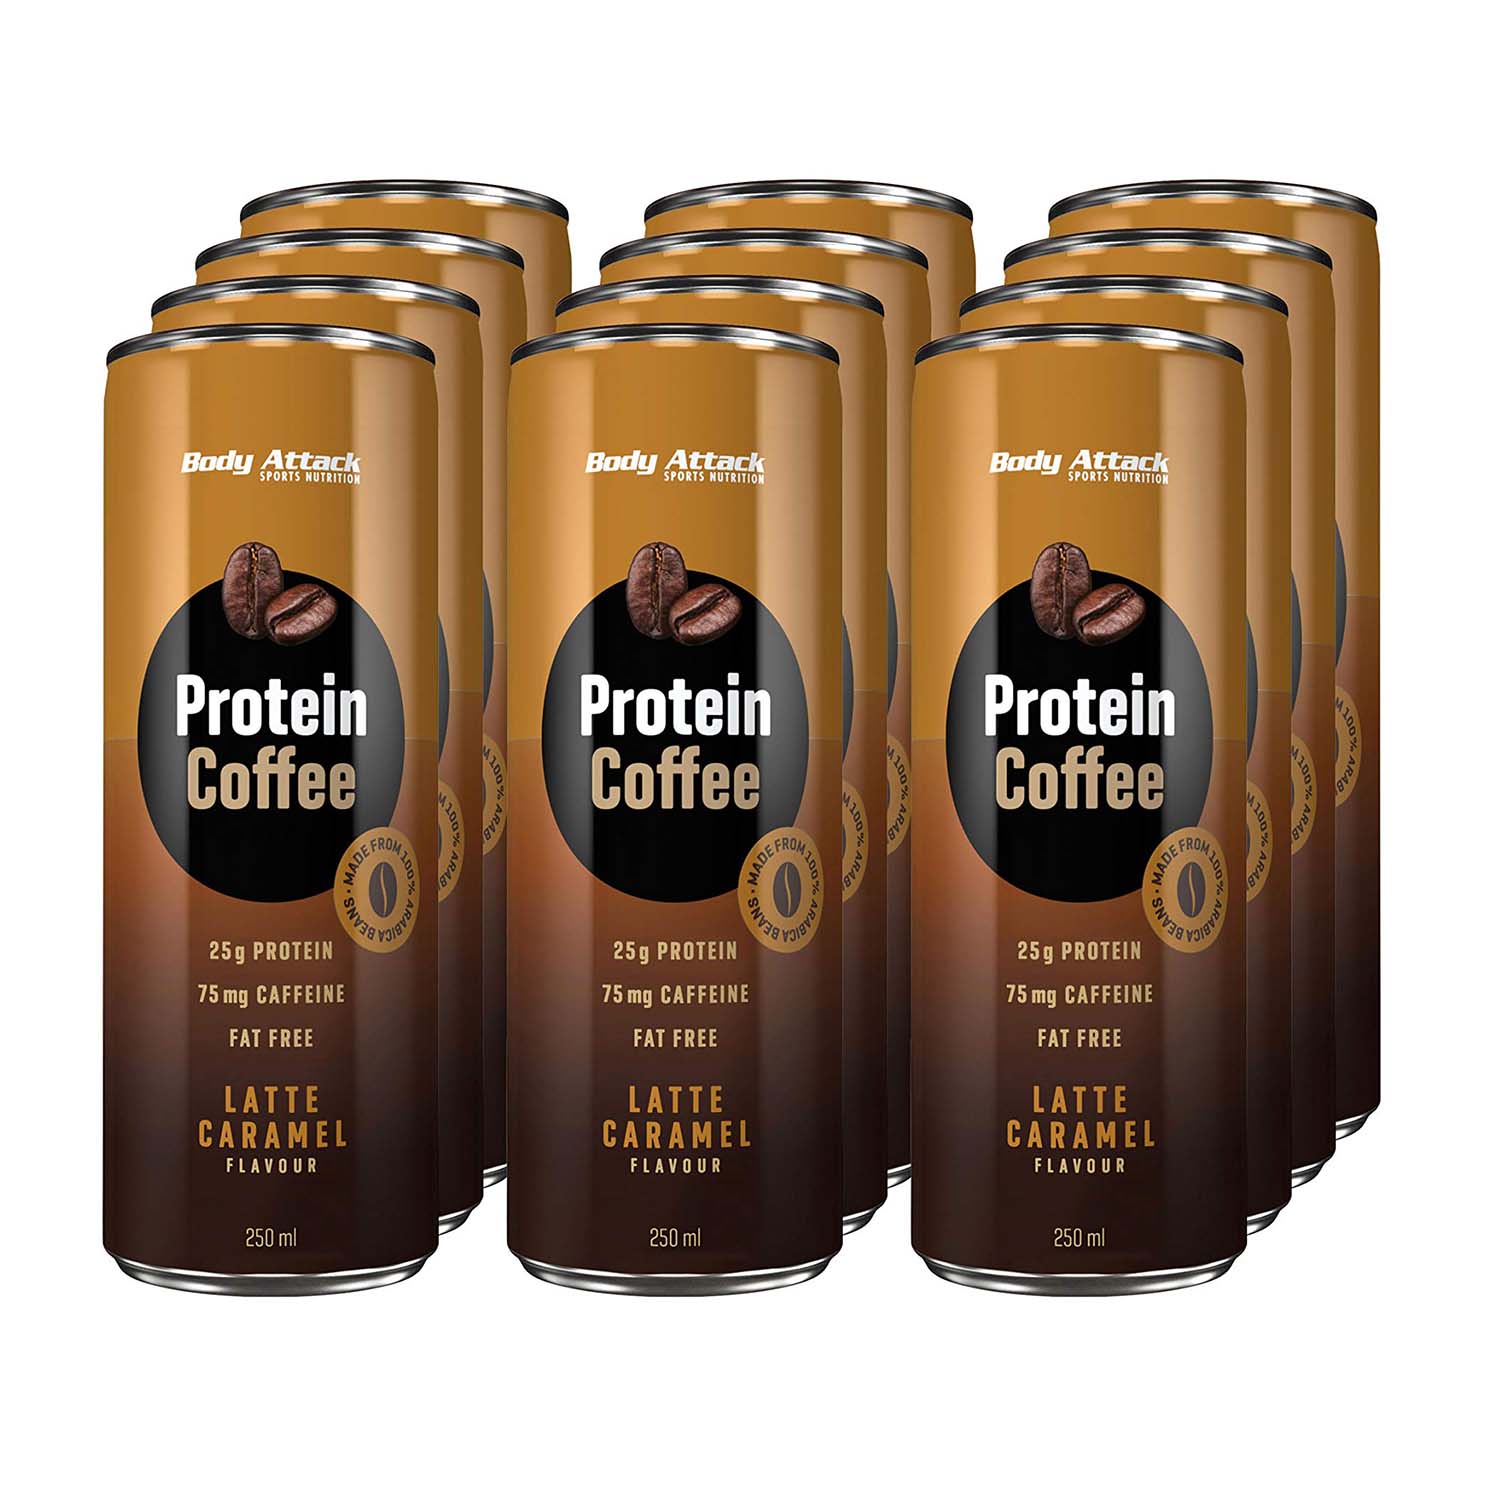 Body Attack Protein Coffee, Latte Caramel, Box of 12 Pieces